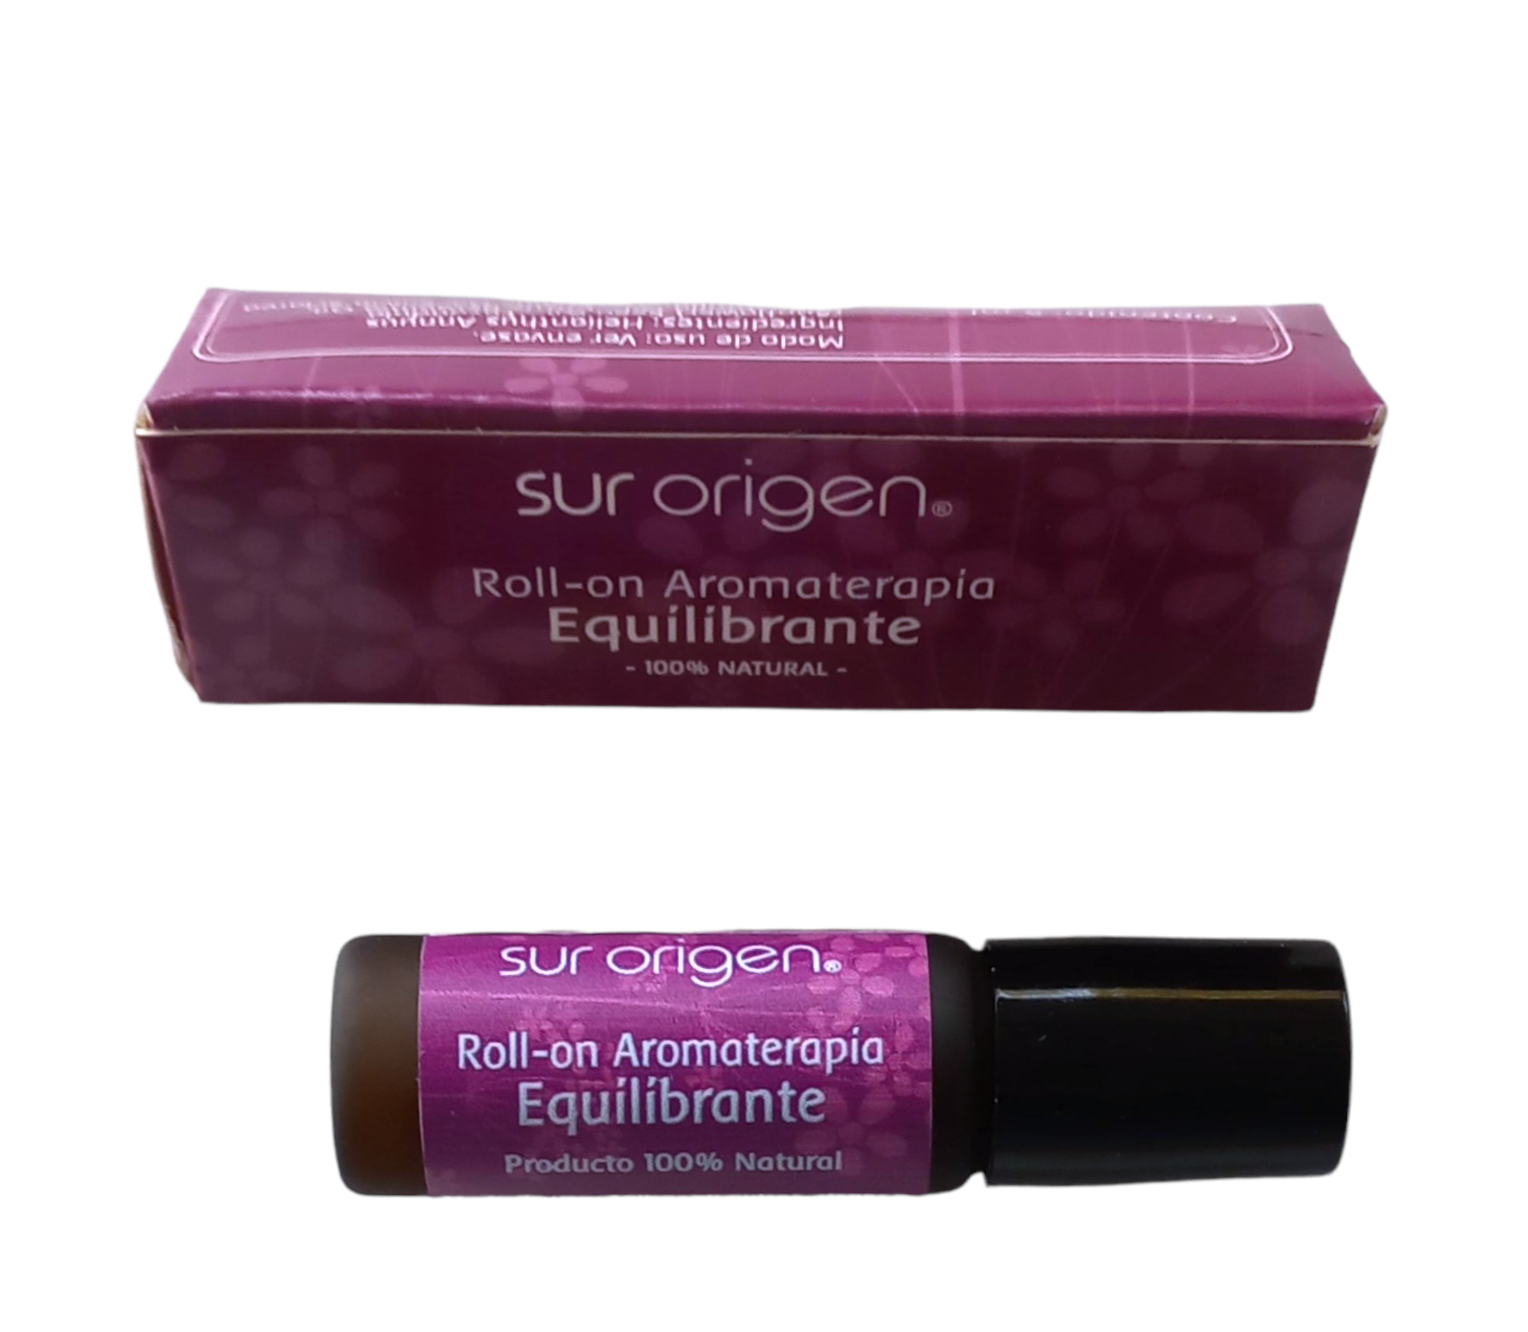 Roll on Aromaterapia Equilibrante